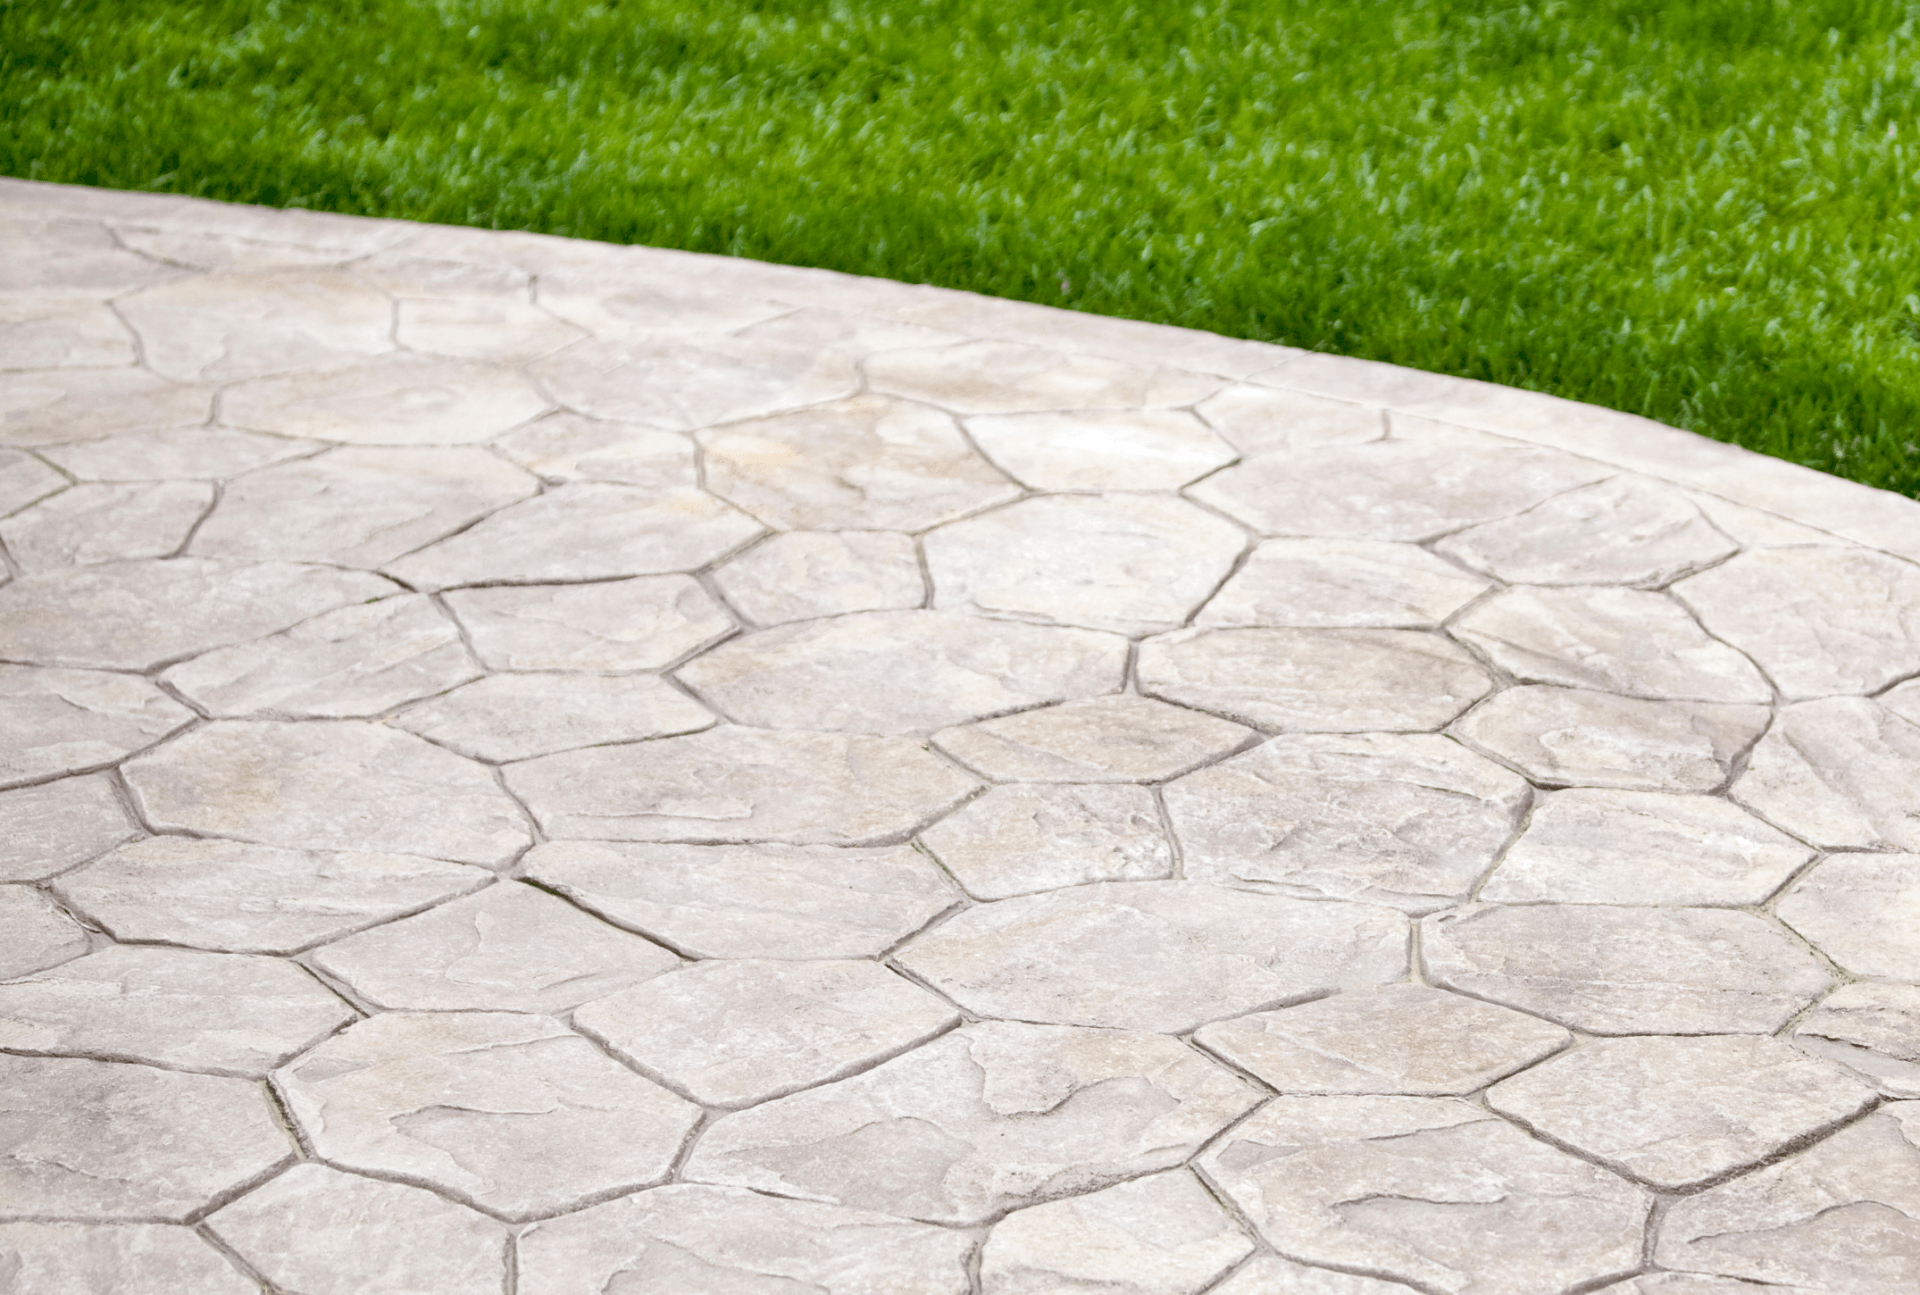 curved stamped concrete patio in cobblestone style